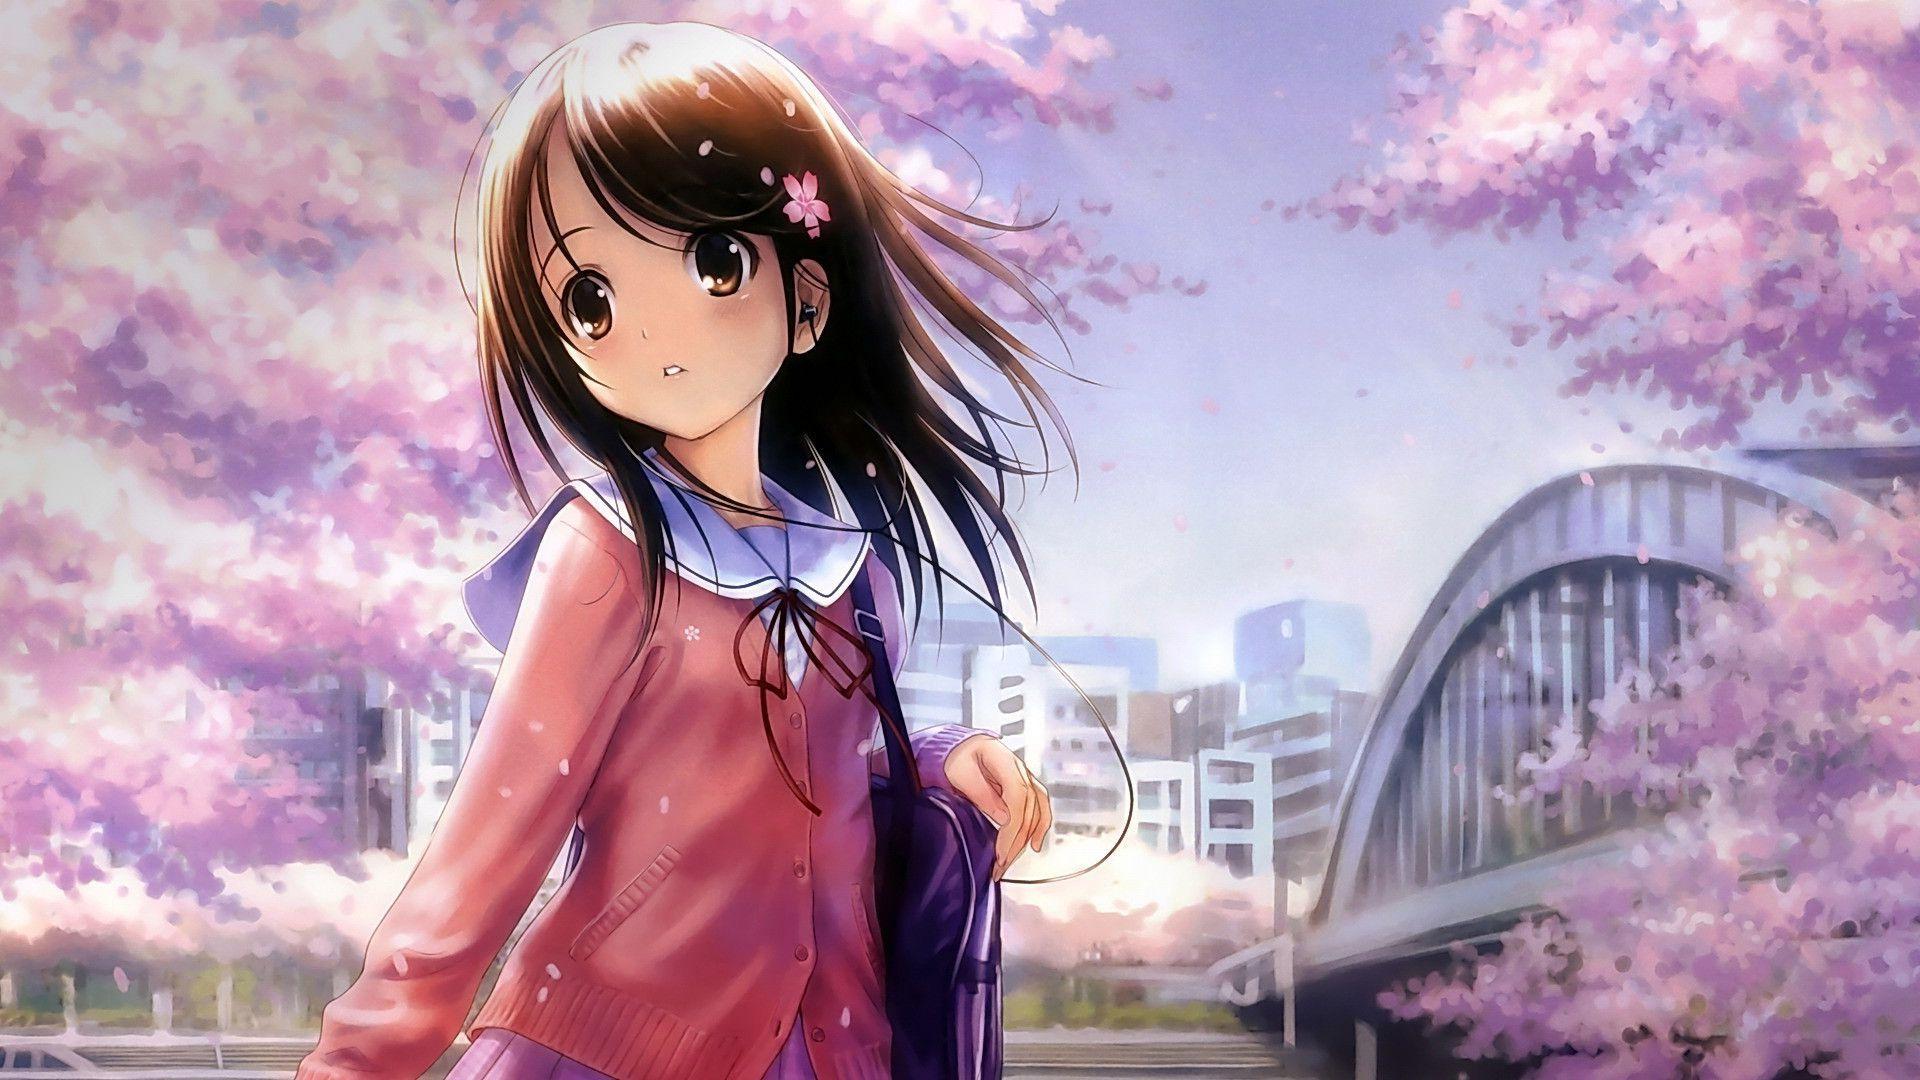 Hd Anime 1080p Wallpapers and Backgrounds